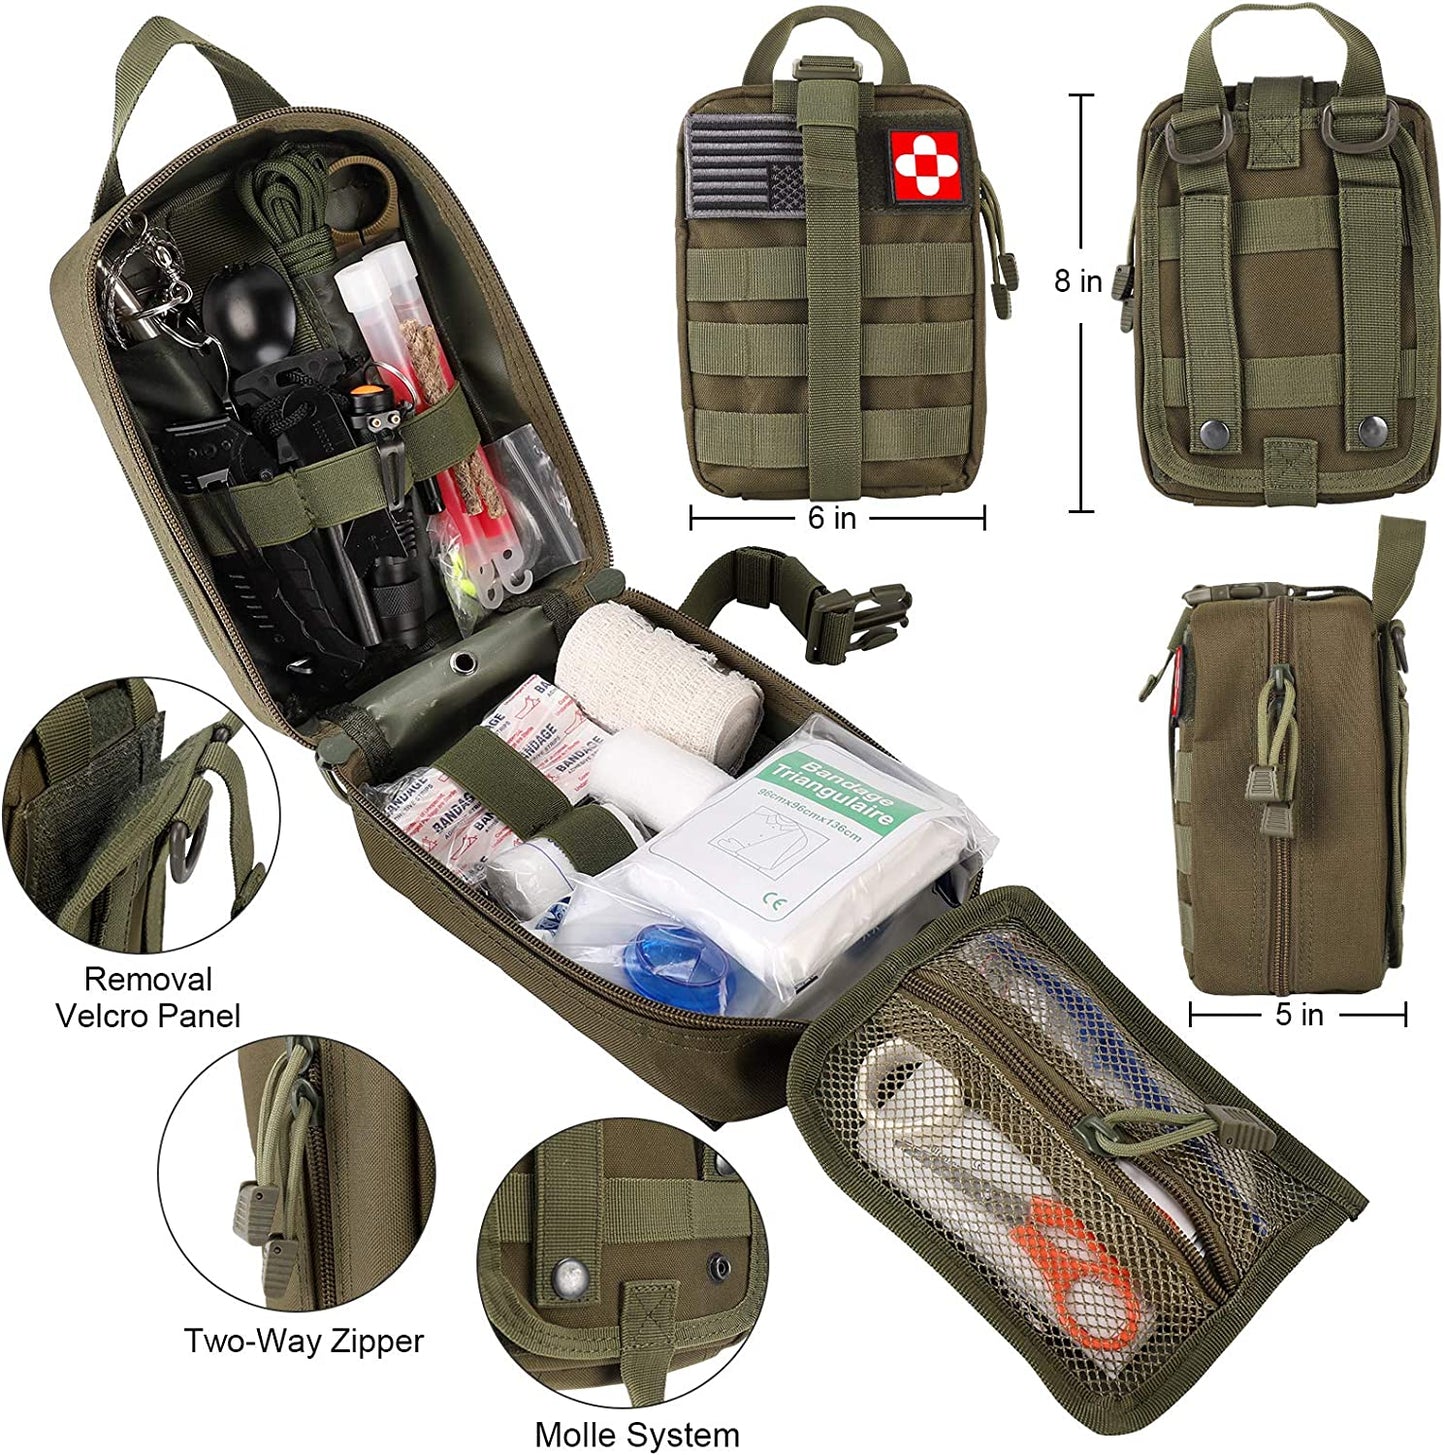 216 Pcs Survival First Aid Kit, Professional Survival Gear Equipment Tools First Aid Supplies for SOS Emergency Hiking Hunting Disaster Camping Adventures